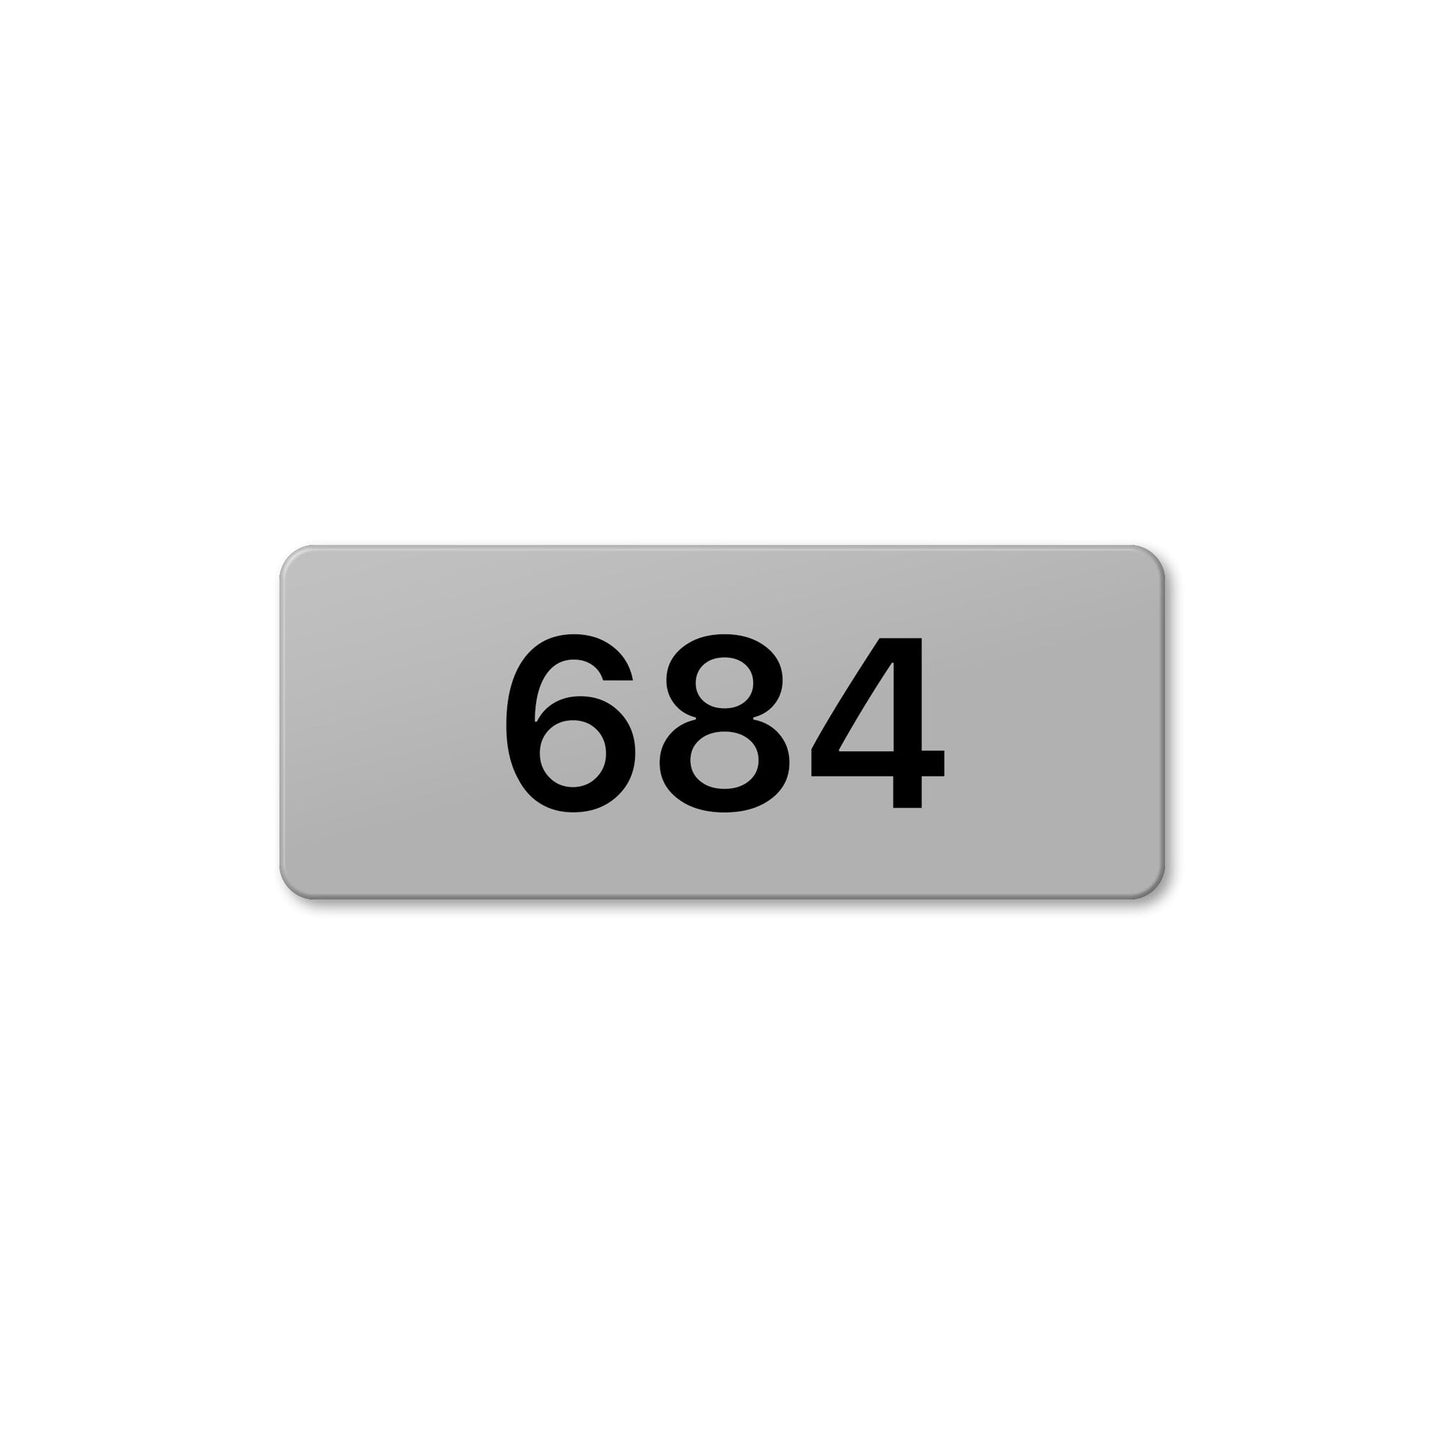 Numeral 684